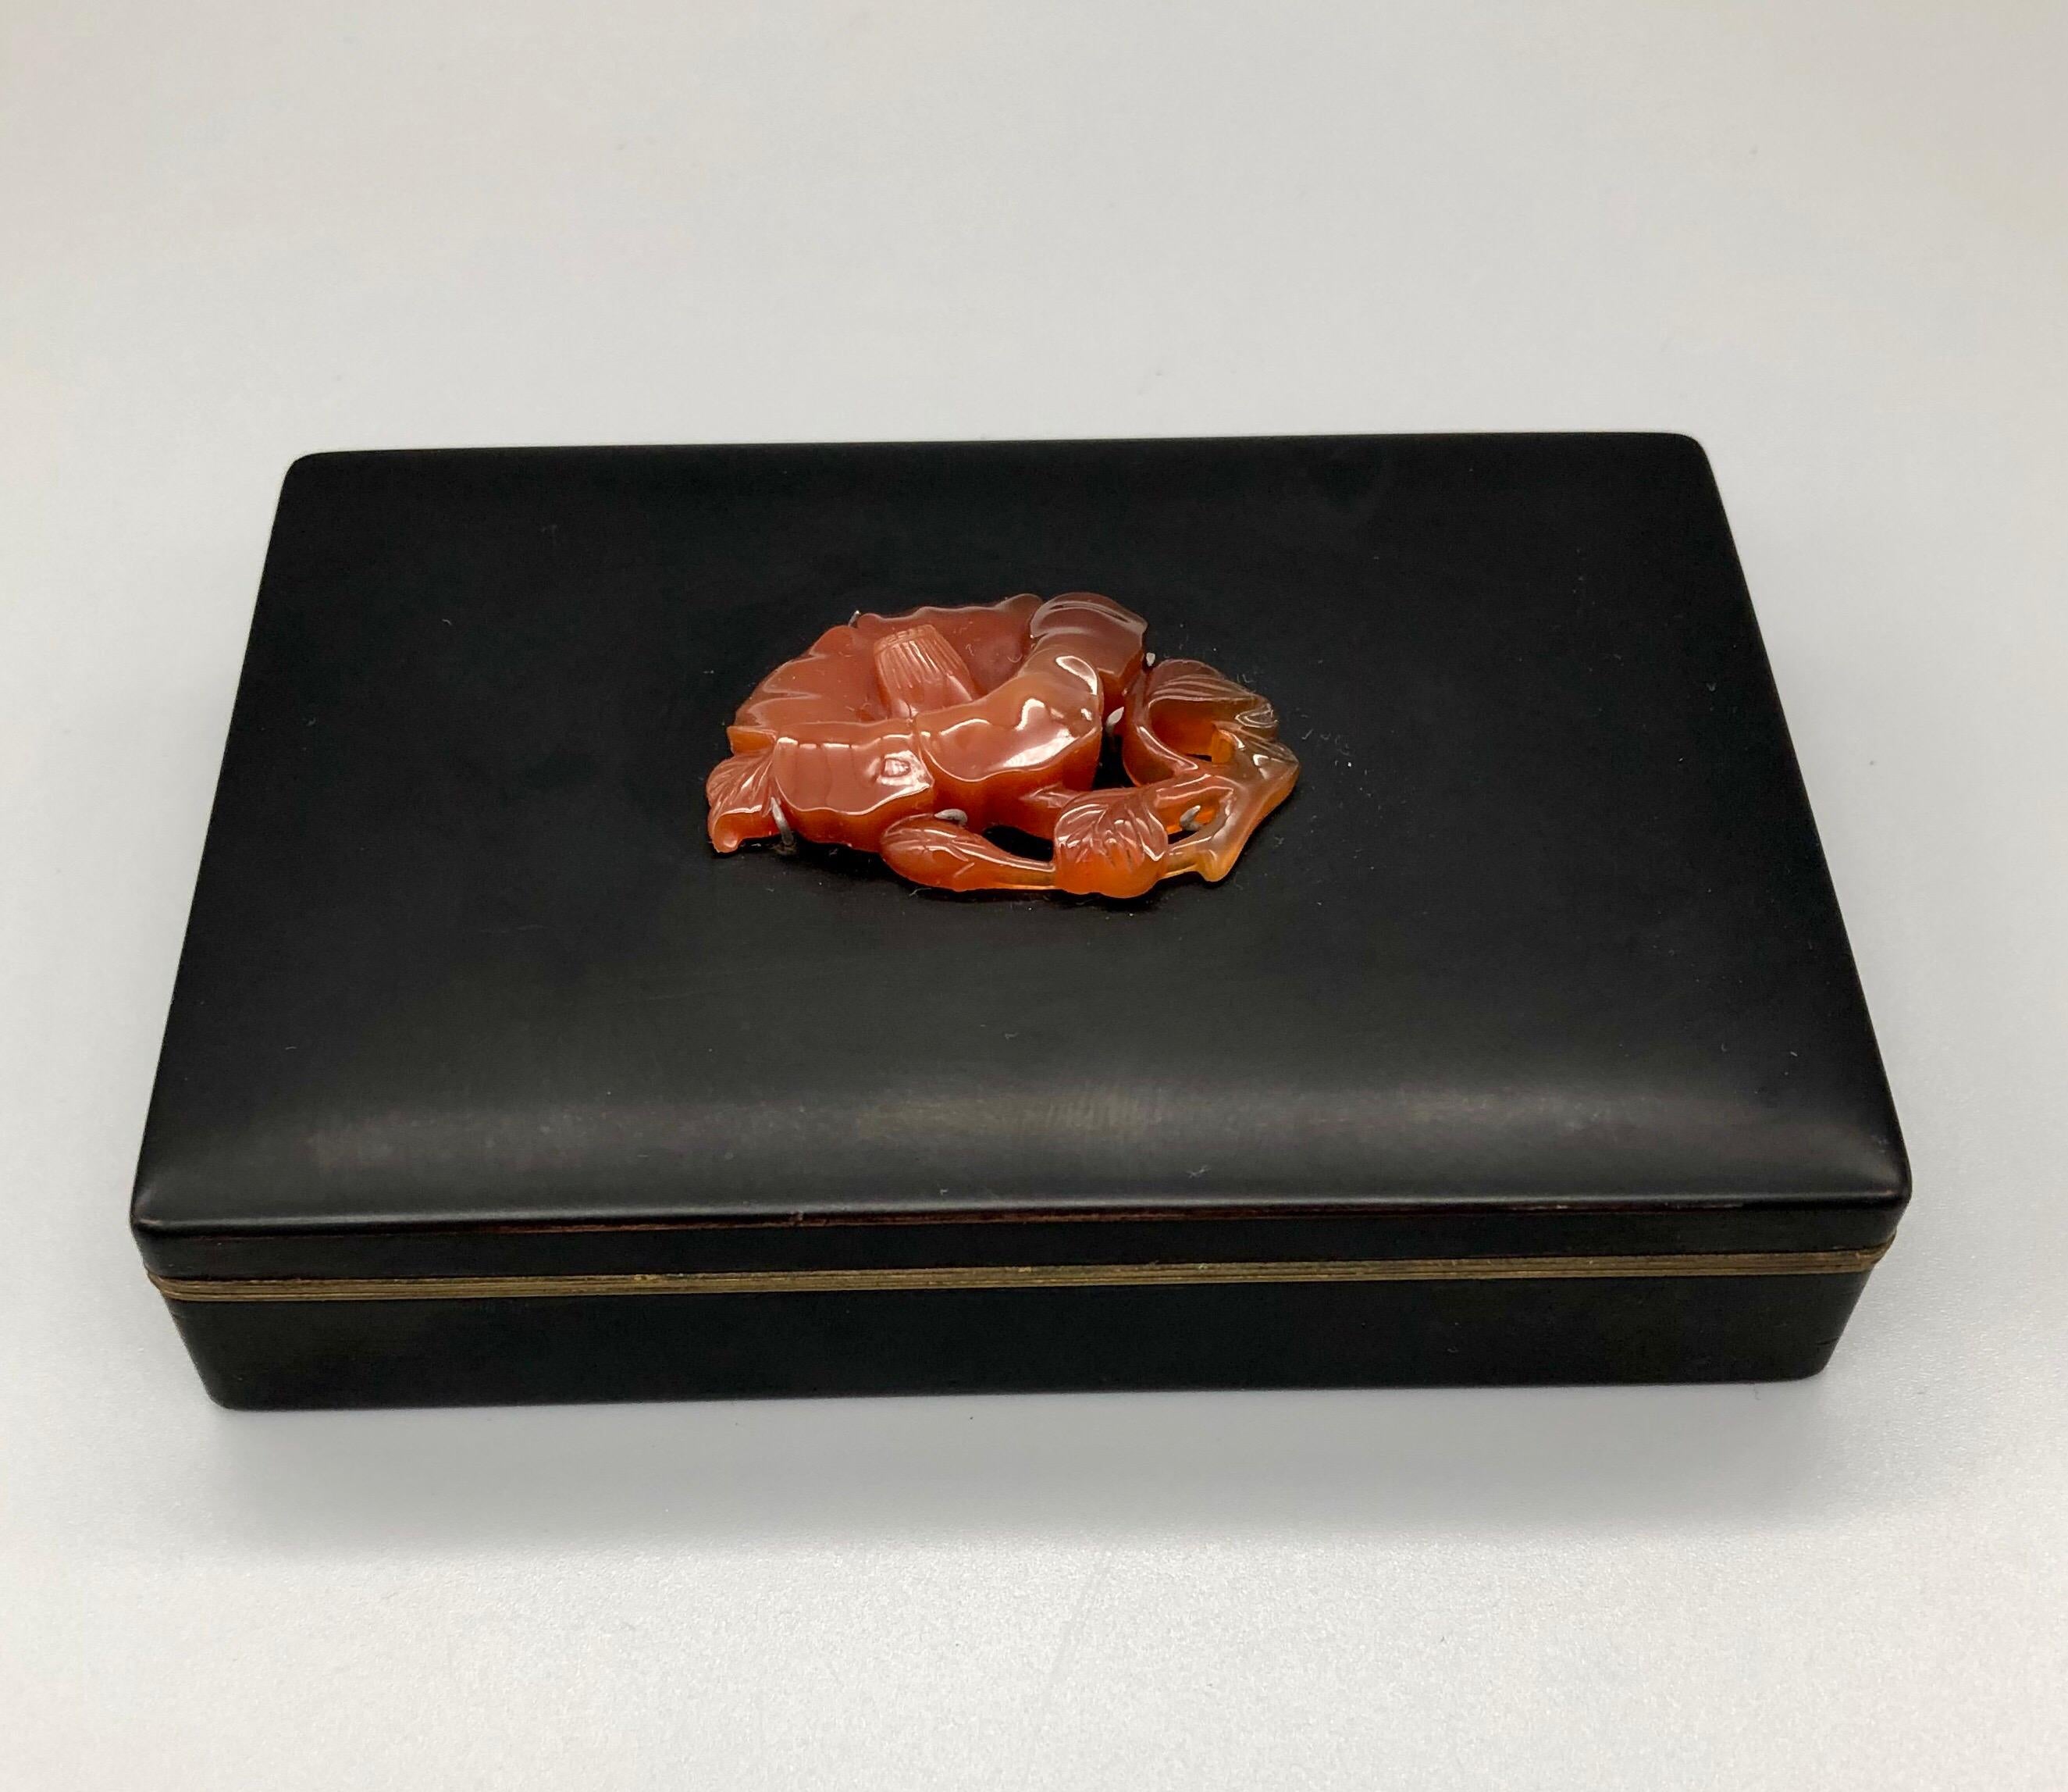 Lovely Classic Yamanaka black enamel box with their signature carved agate flower decorating the lid. Art Deco chic, with Japanese Minimalist sensibility.

The inside of the box is gilt, with Yamanaka and Made in Japan stamped on the bottom. There